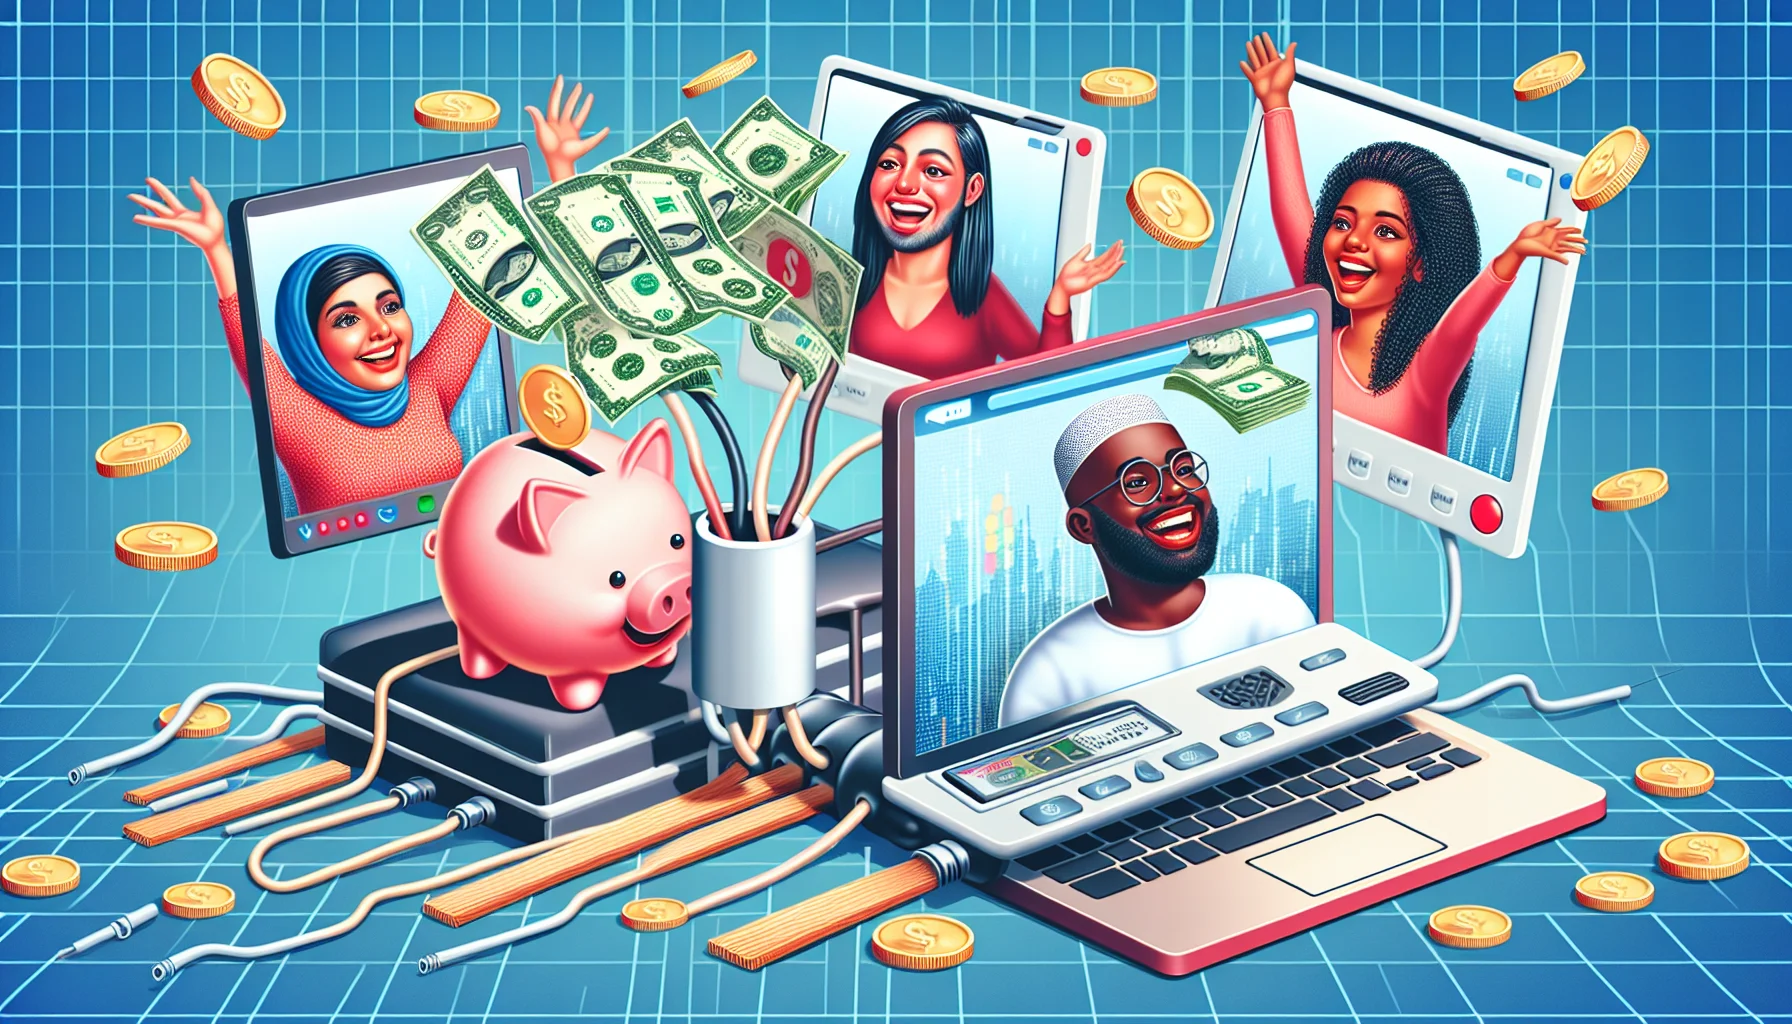 Create a lively and enticing image of a virtual event, humorously depicting the concept of affiliate marketing. The event is set against a digital background, with diverse virtual attendees participating from their laptop screens - a Middle-Eastern man and a Black woman. They are joyfully watching cash coins flow into a piggy bank plugged with internet cables, symbolising the online money-making aspect of affiliate marketing. There should also be elements of online advertising - such as a link being clicked and generating money, to further solidify the affiliate marketing concept.